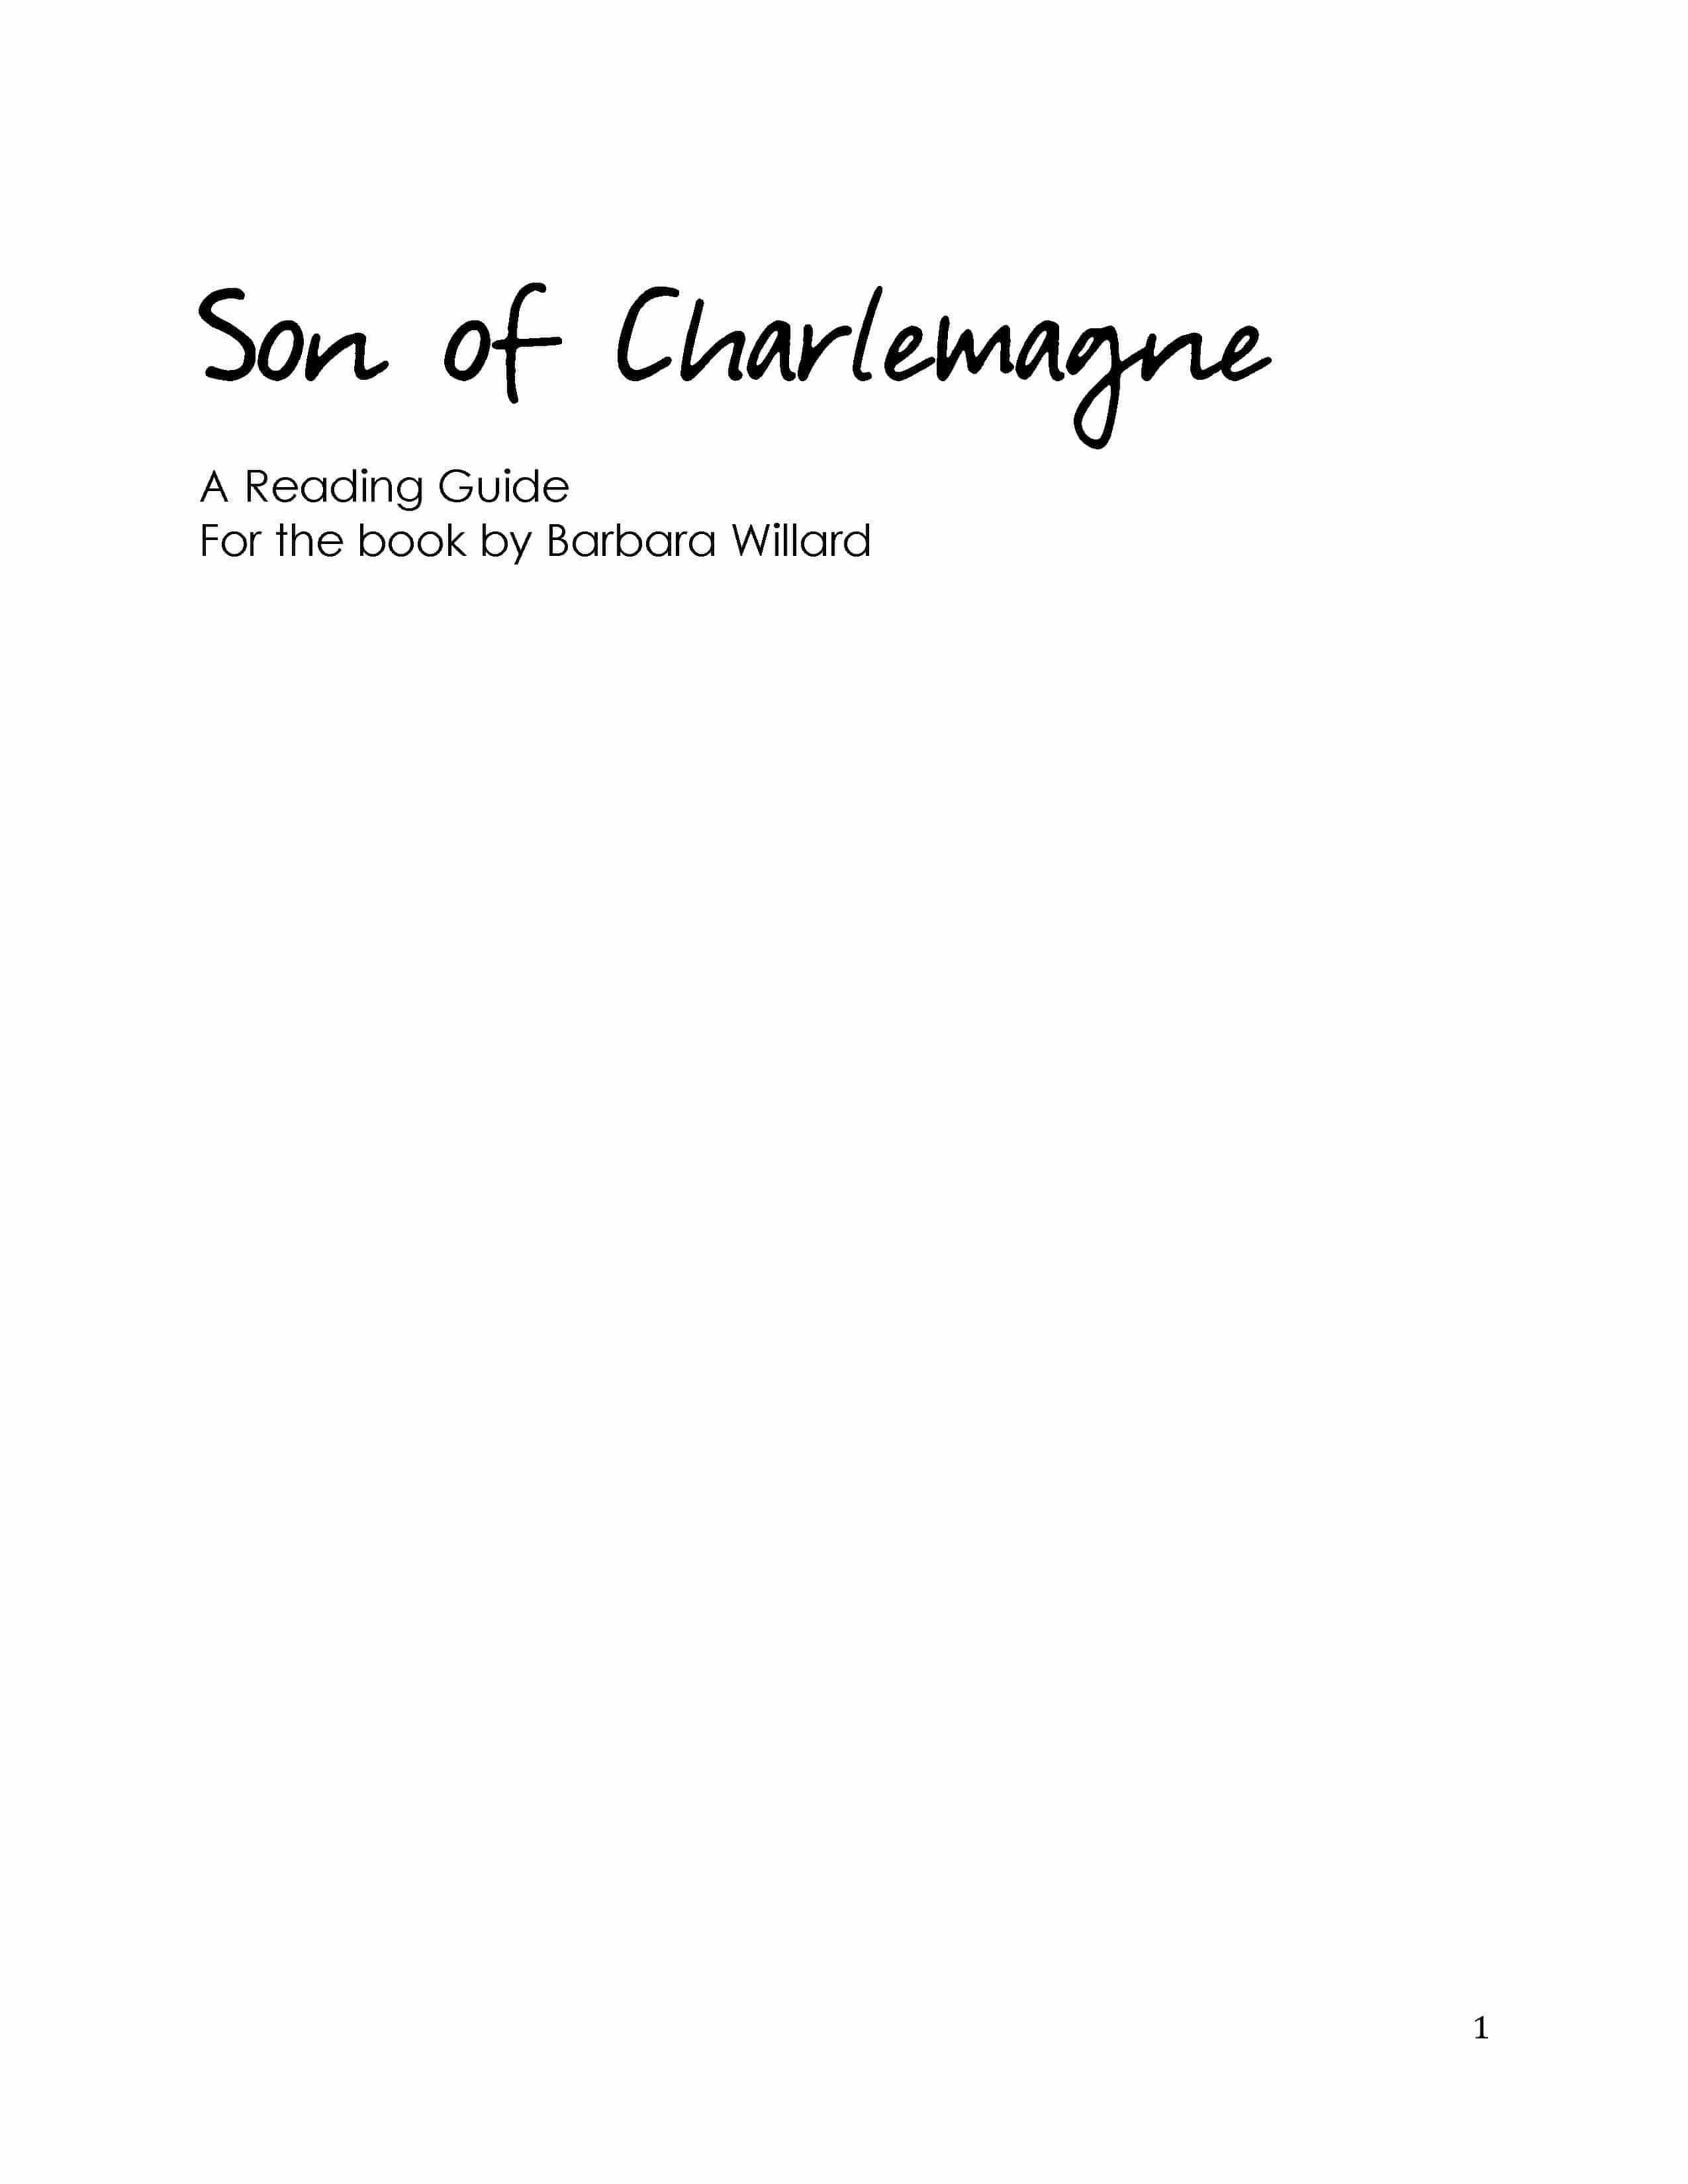 Son of Charlemagne - Reading Guide (Download)